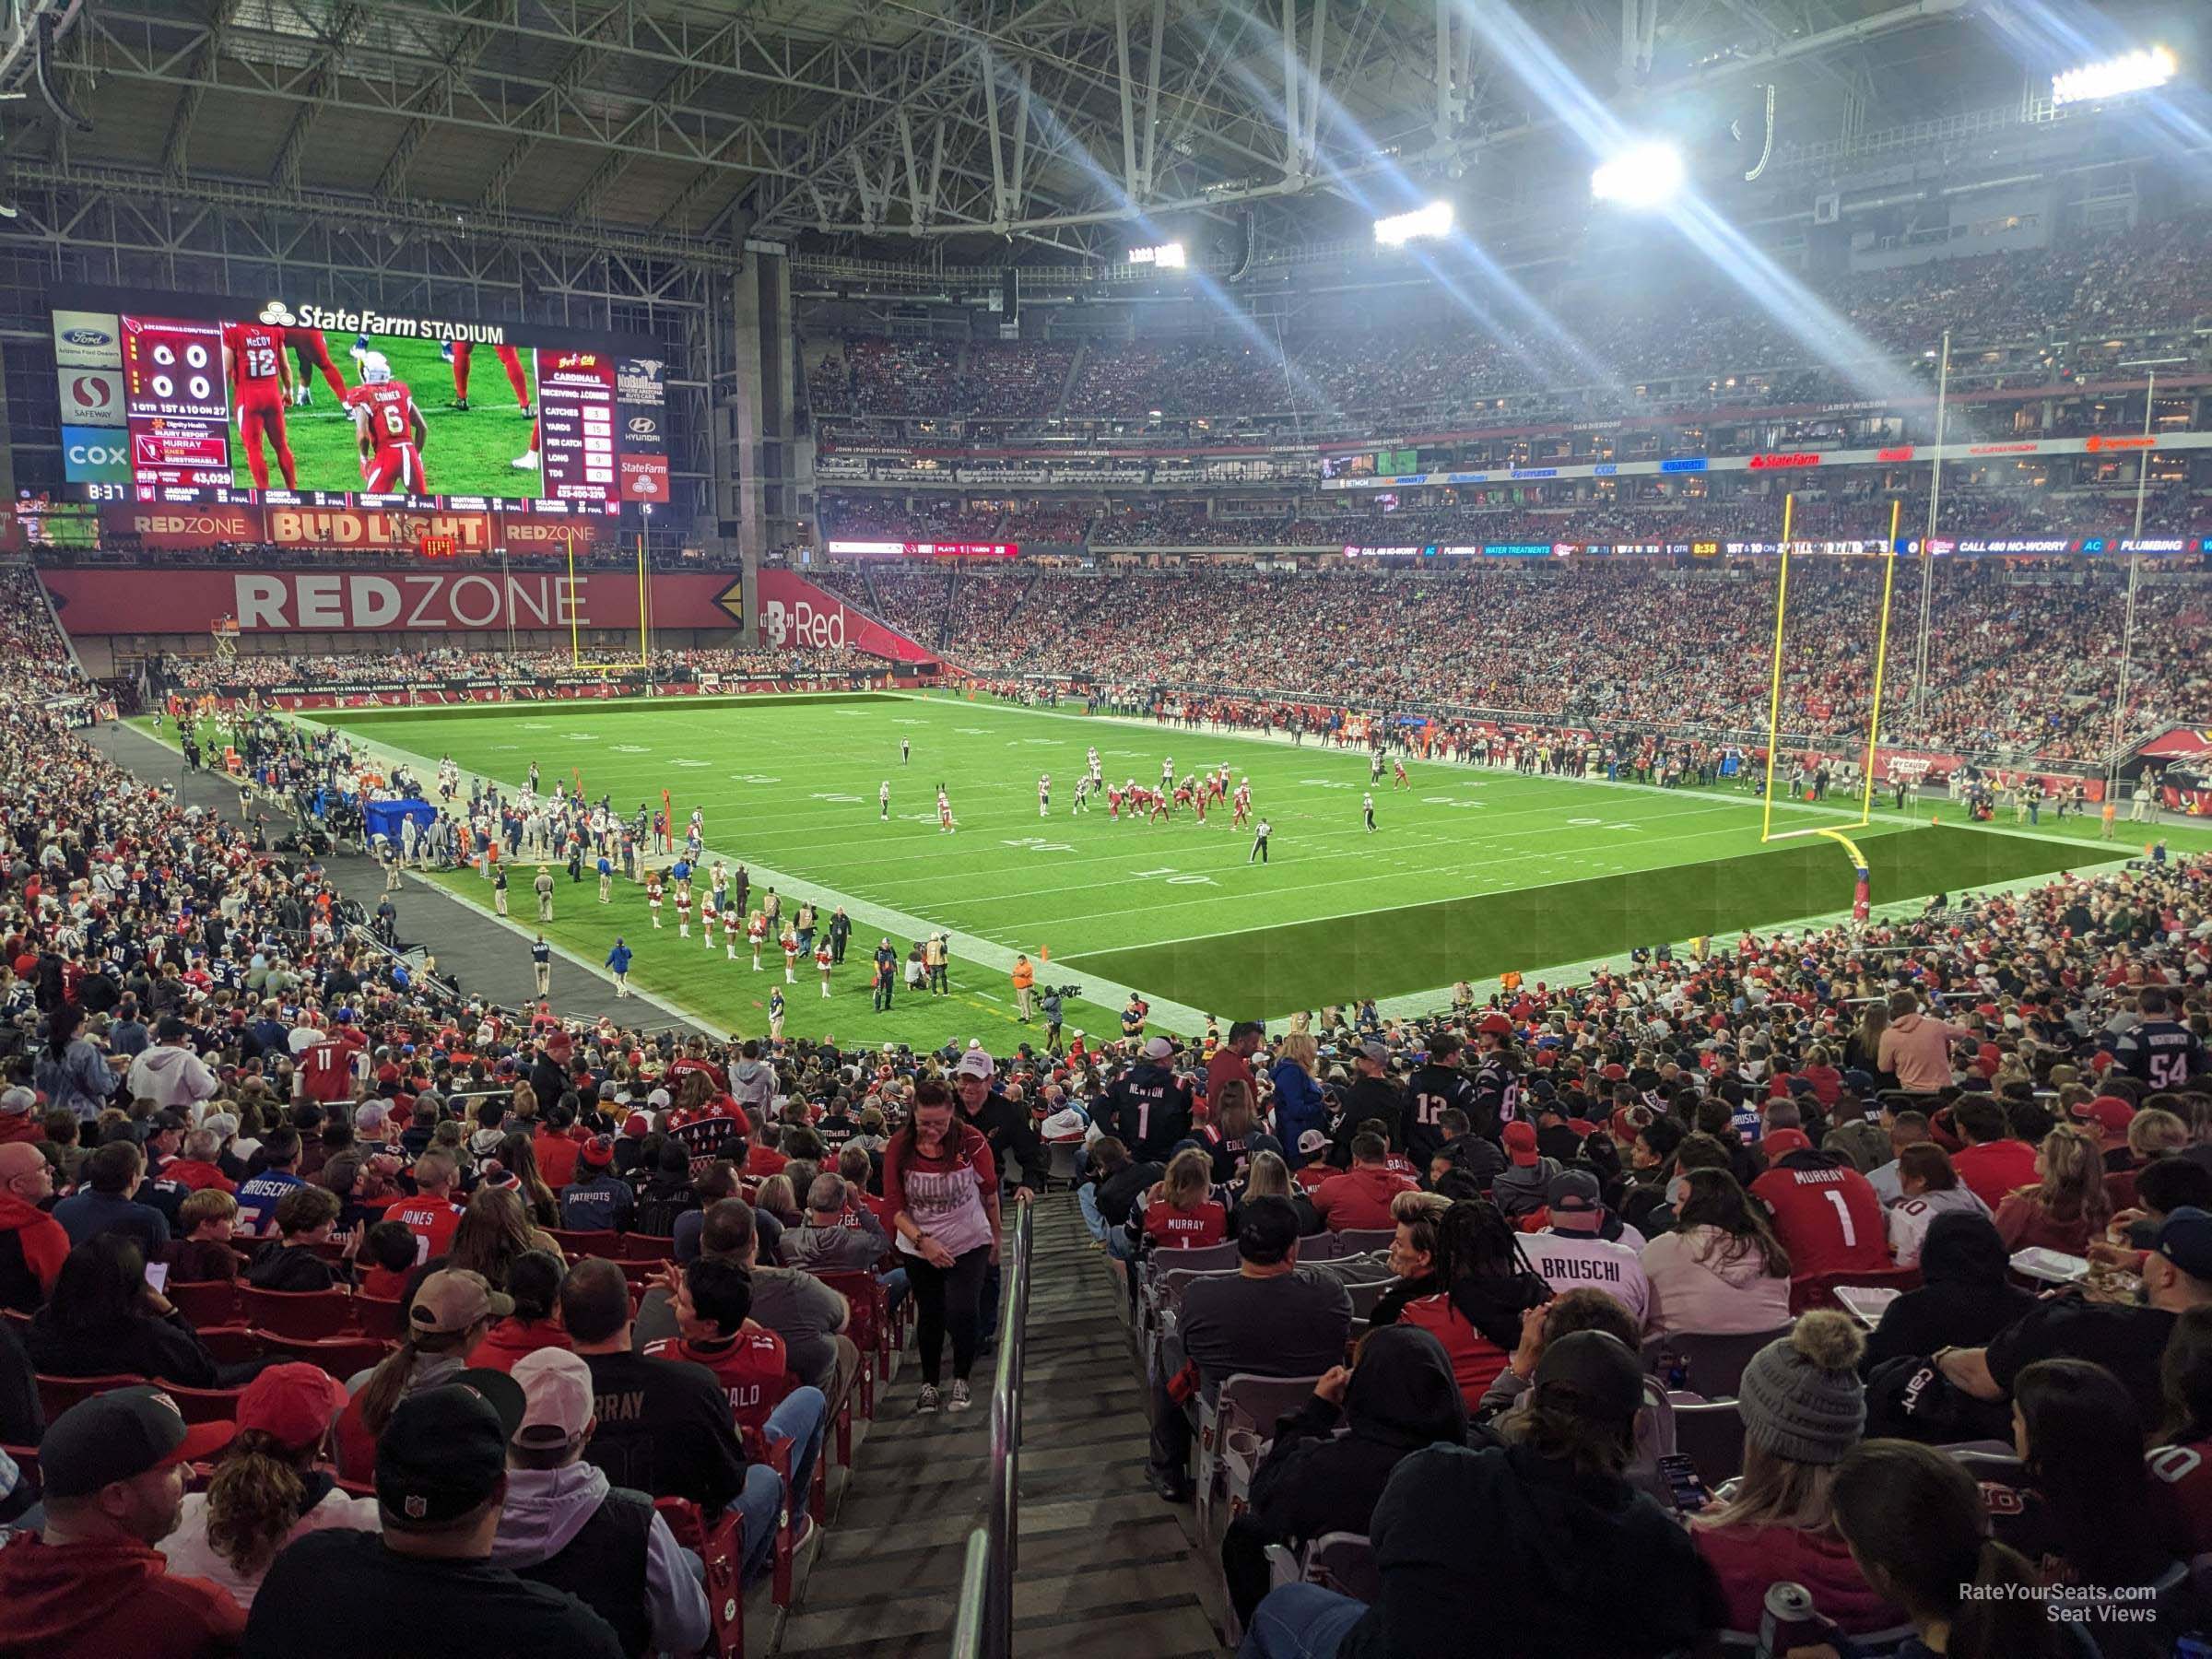 section 123, row 41 seat view  for football - state farm stadium